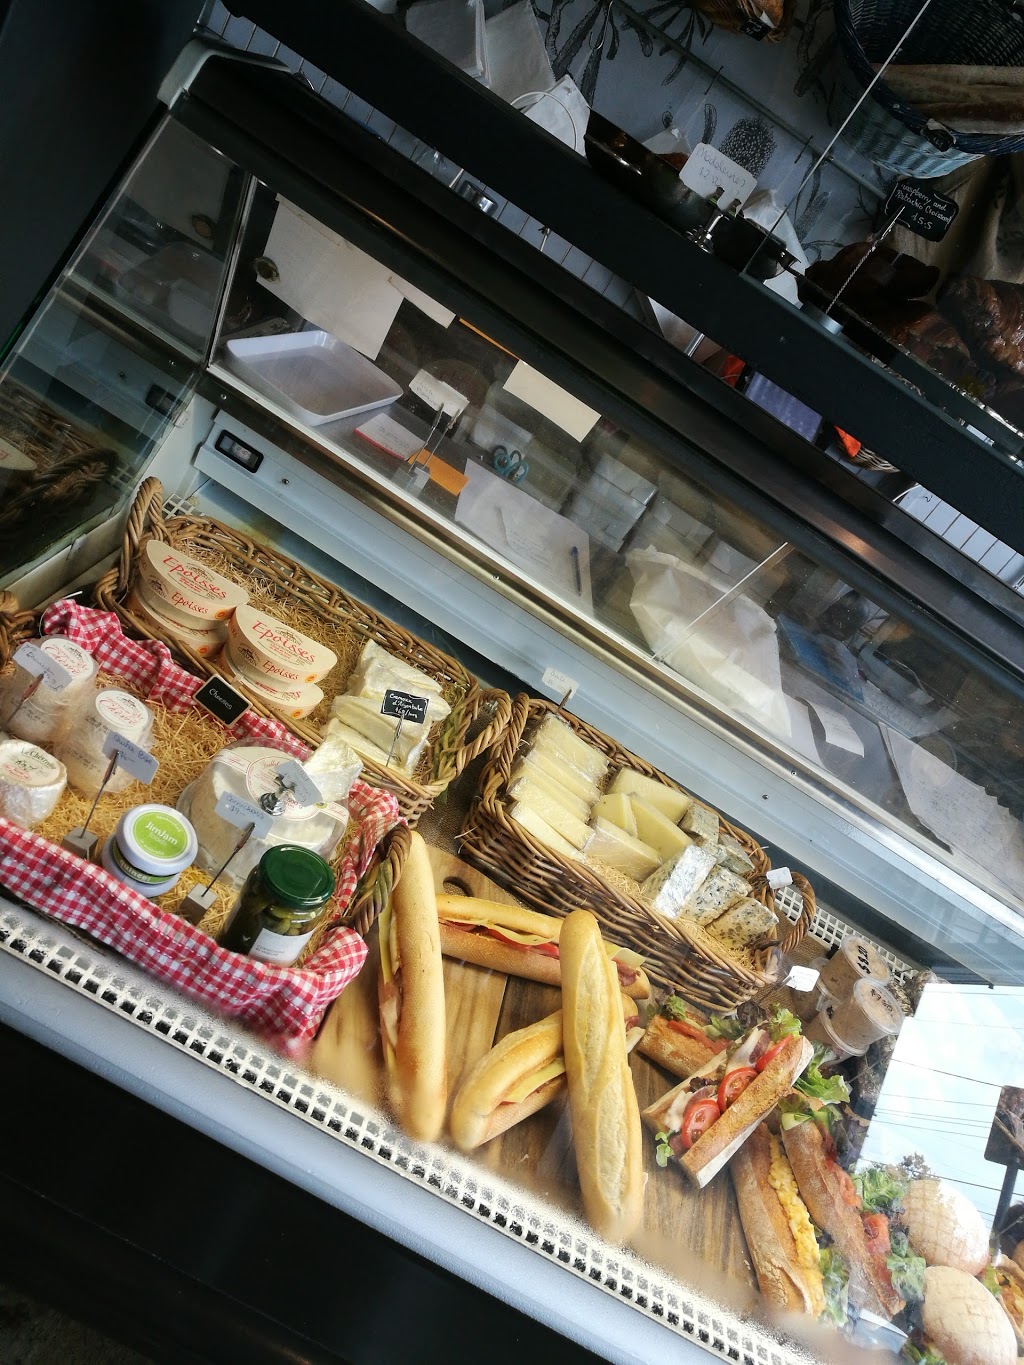 The Little French Deli | cafe | 524 Nepean Hwy, Bonbeach VIC 3196, Australia | 0397760855 OR +61 3 9776 0855